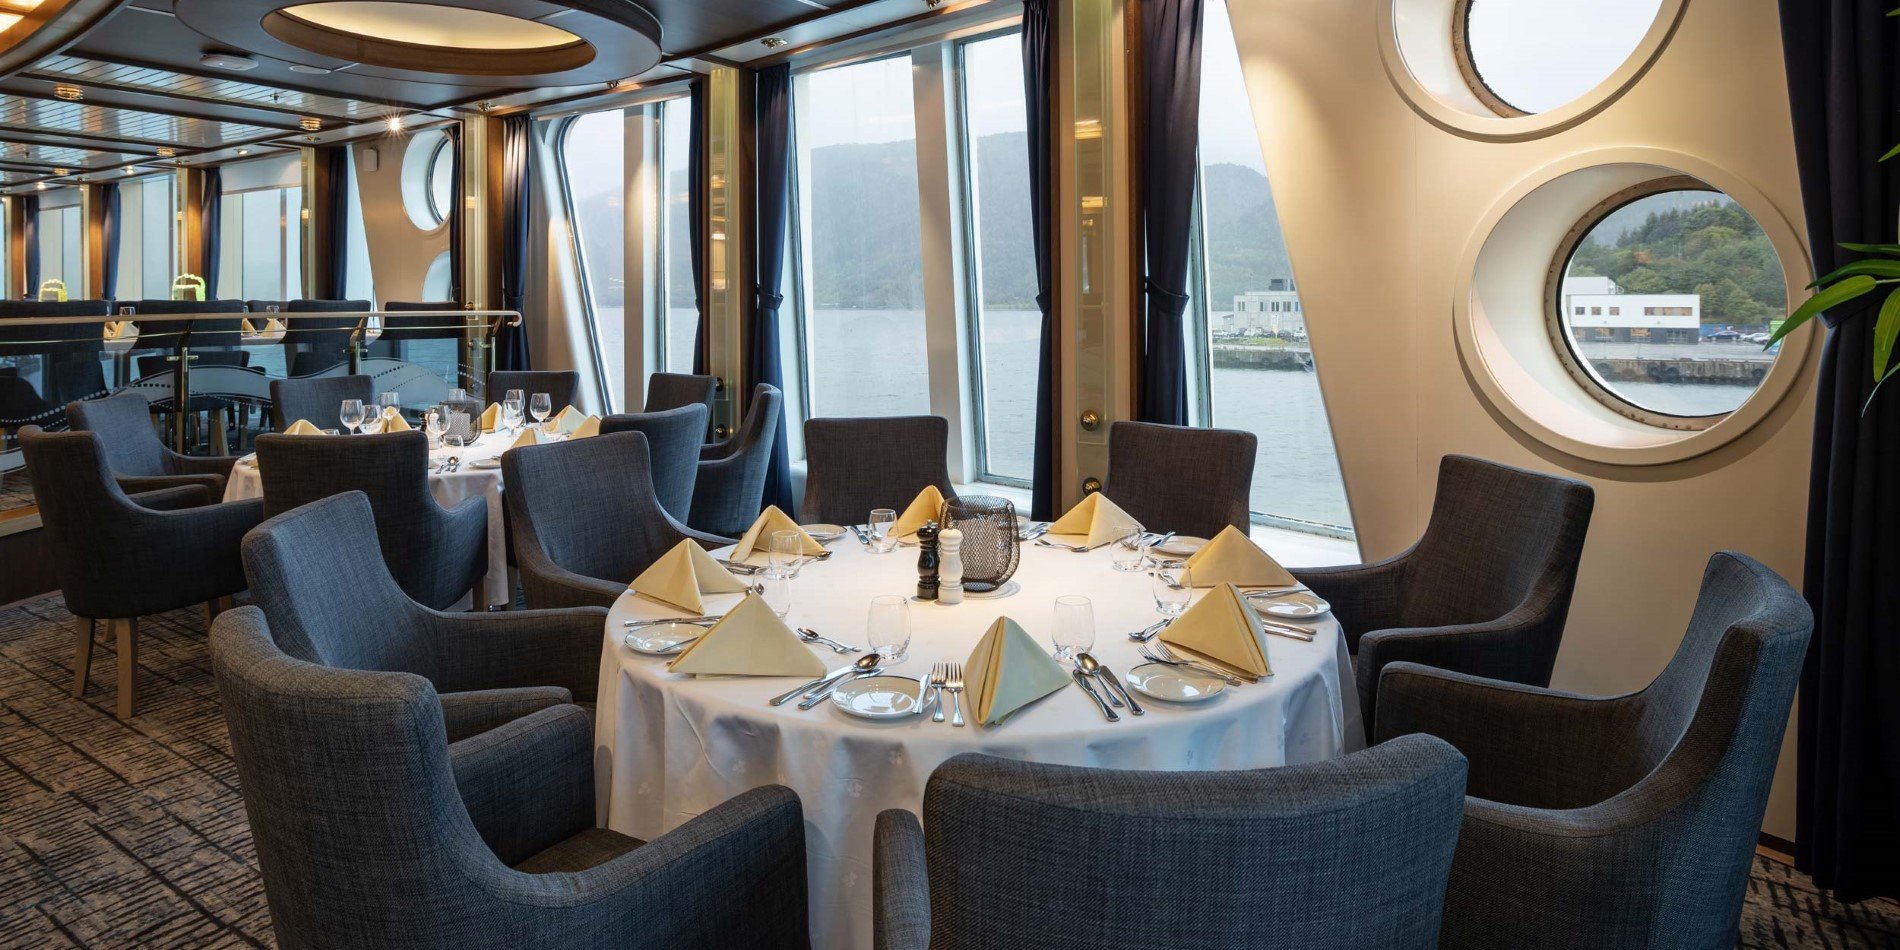 Round table with big windows in hte background  in Aune restaurant onboard MS Fram.